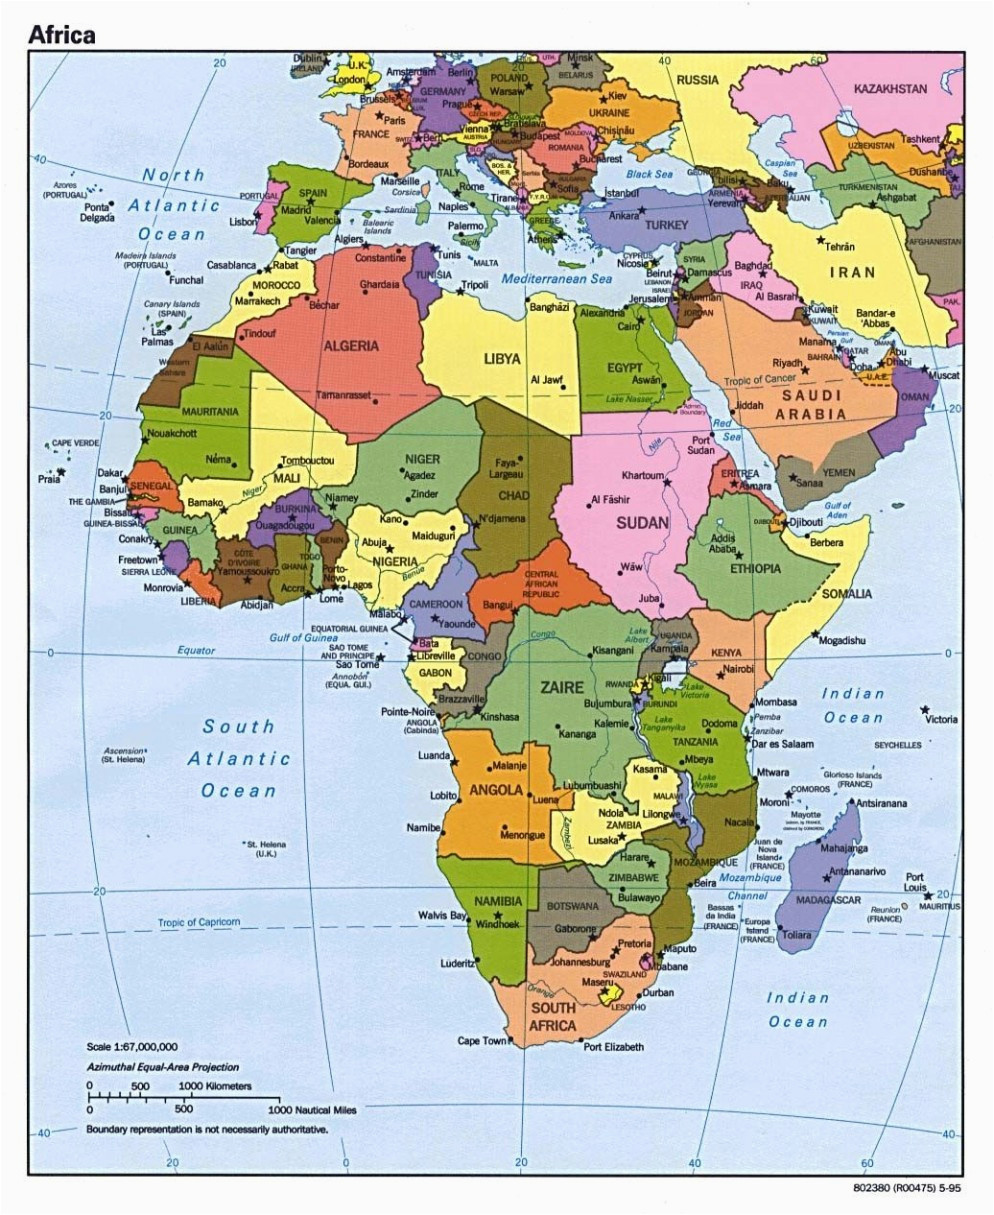 World Map Of Africa and Europe Blank Europe Map Climatejourney org